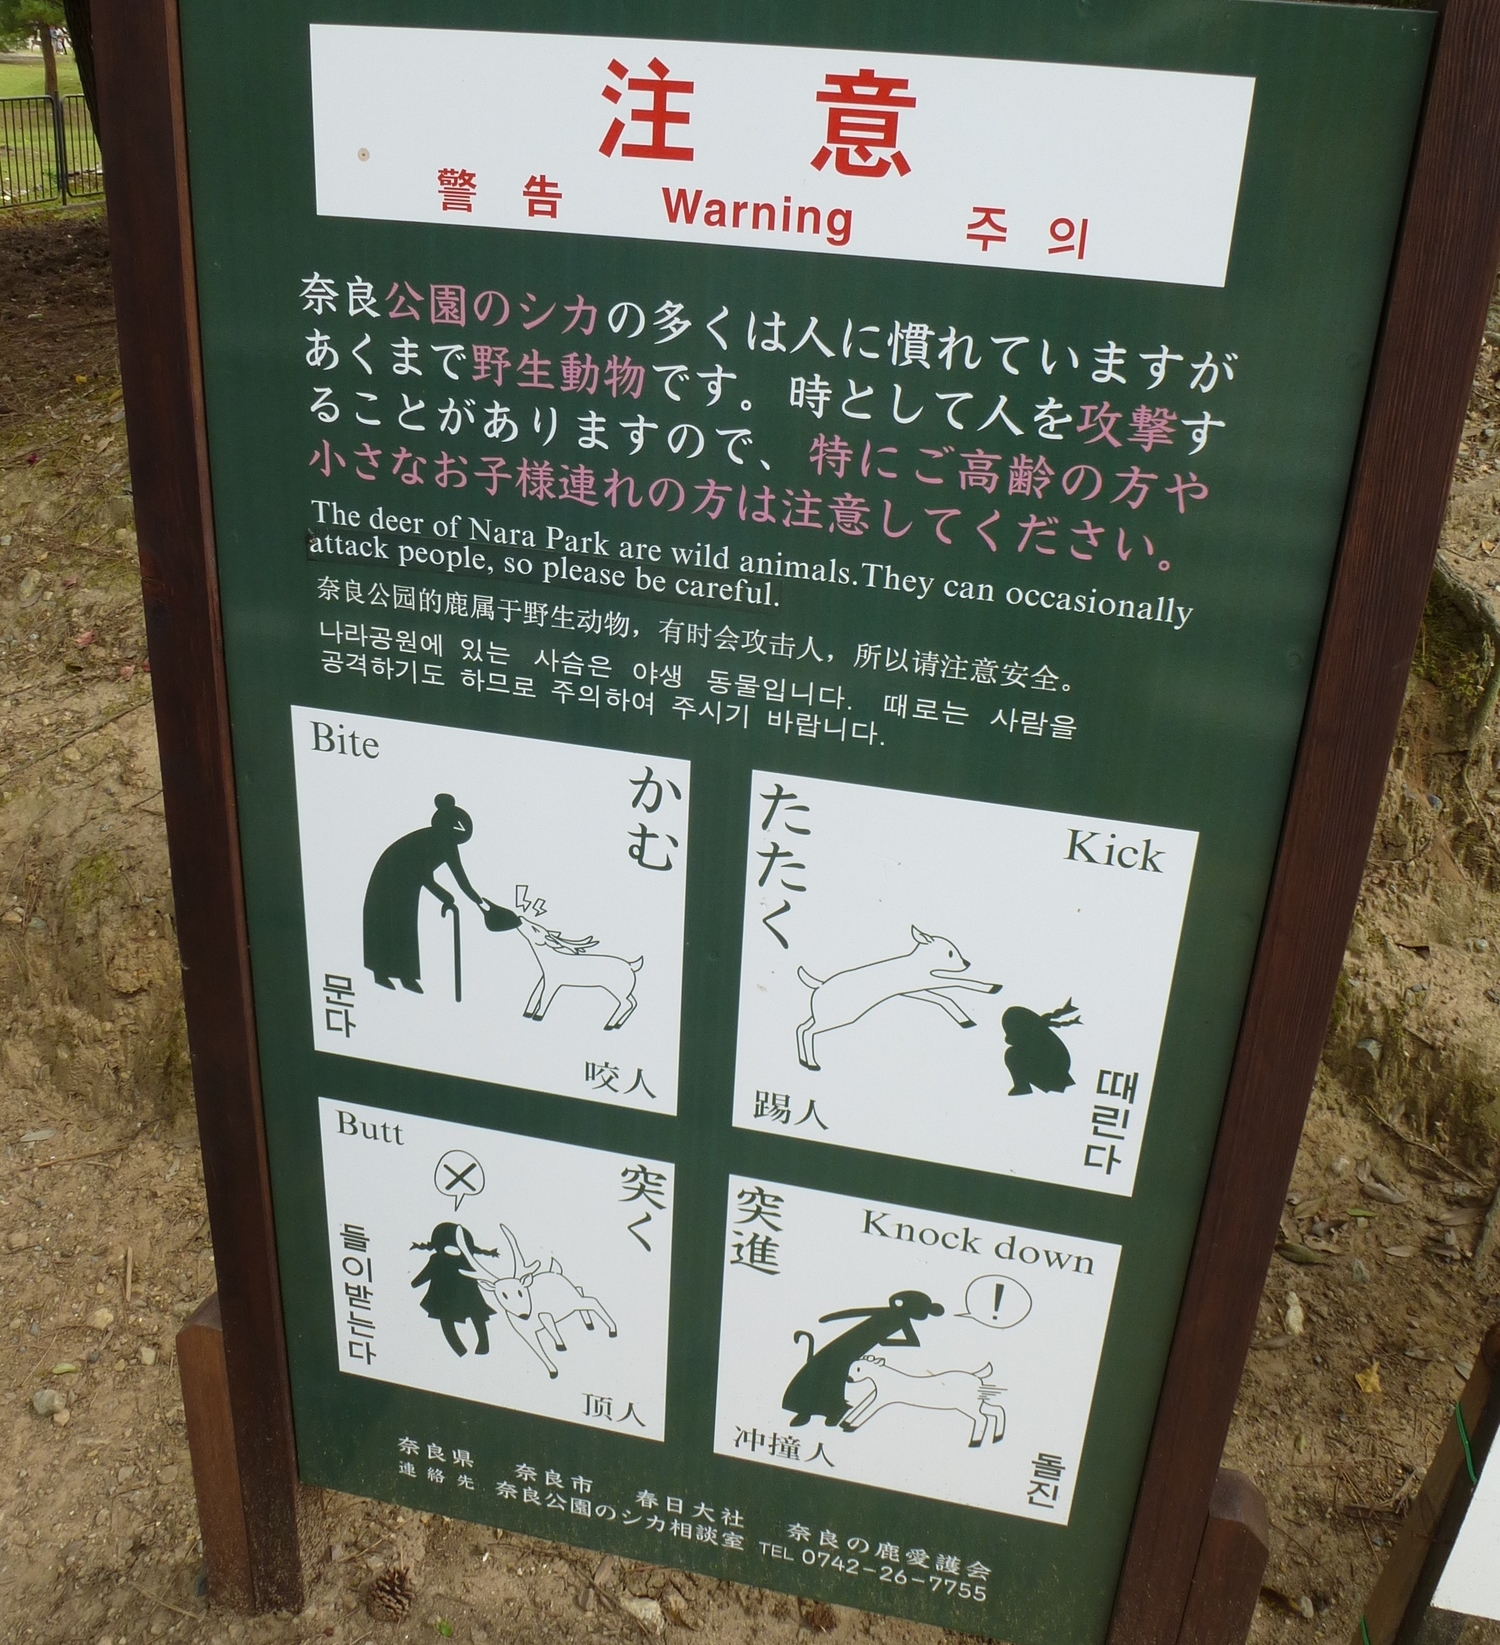 Warning sign about the "dangerous" deer